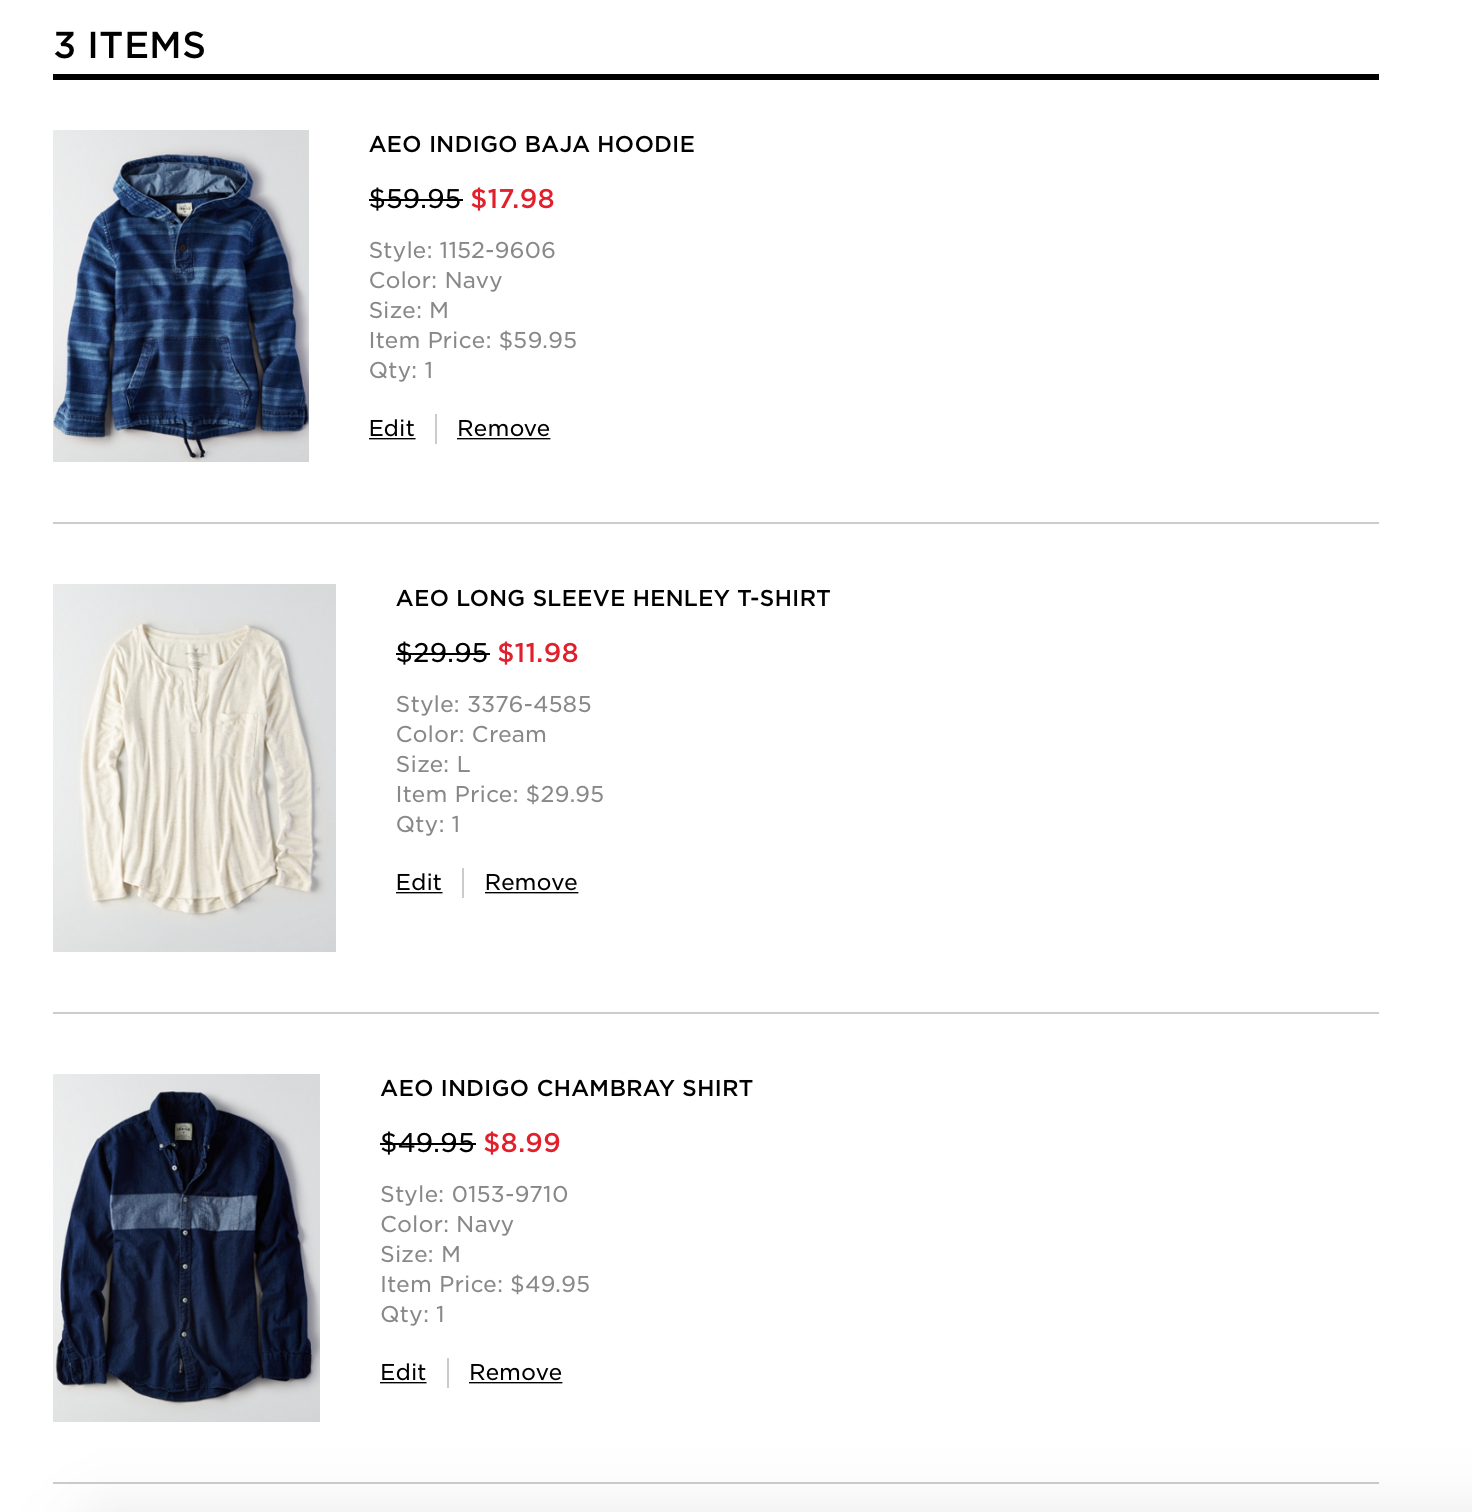 American Eagle has an extra 50-60% off clearance items